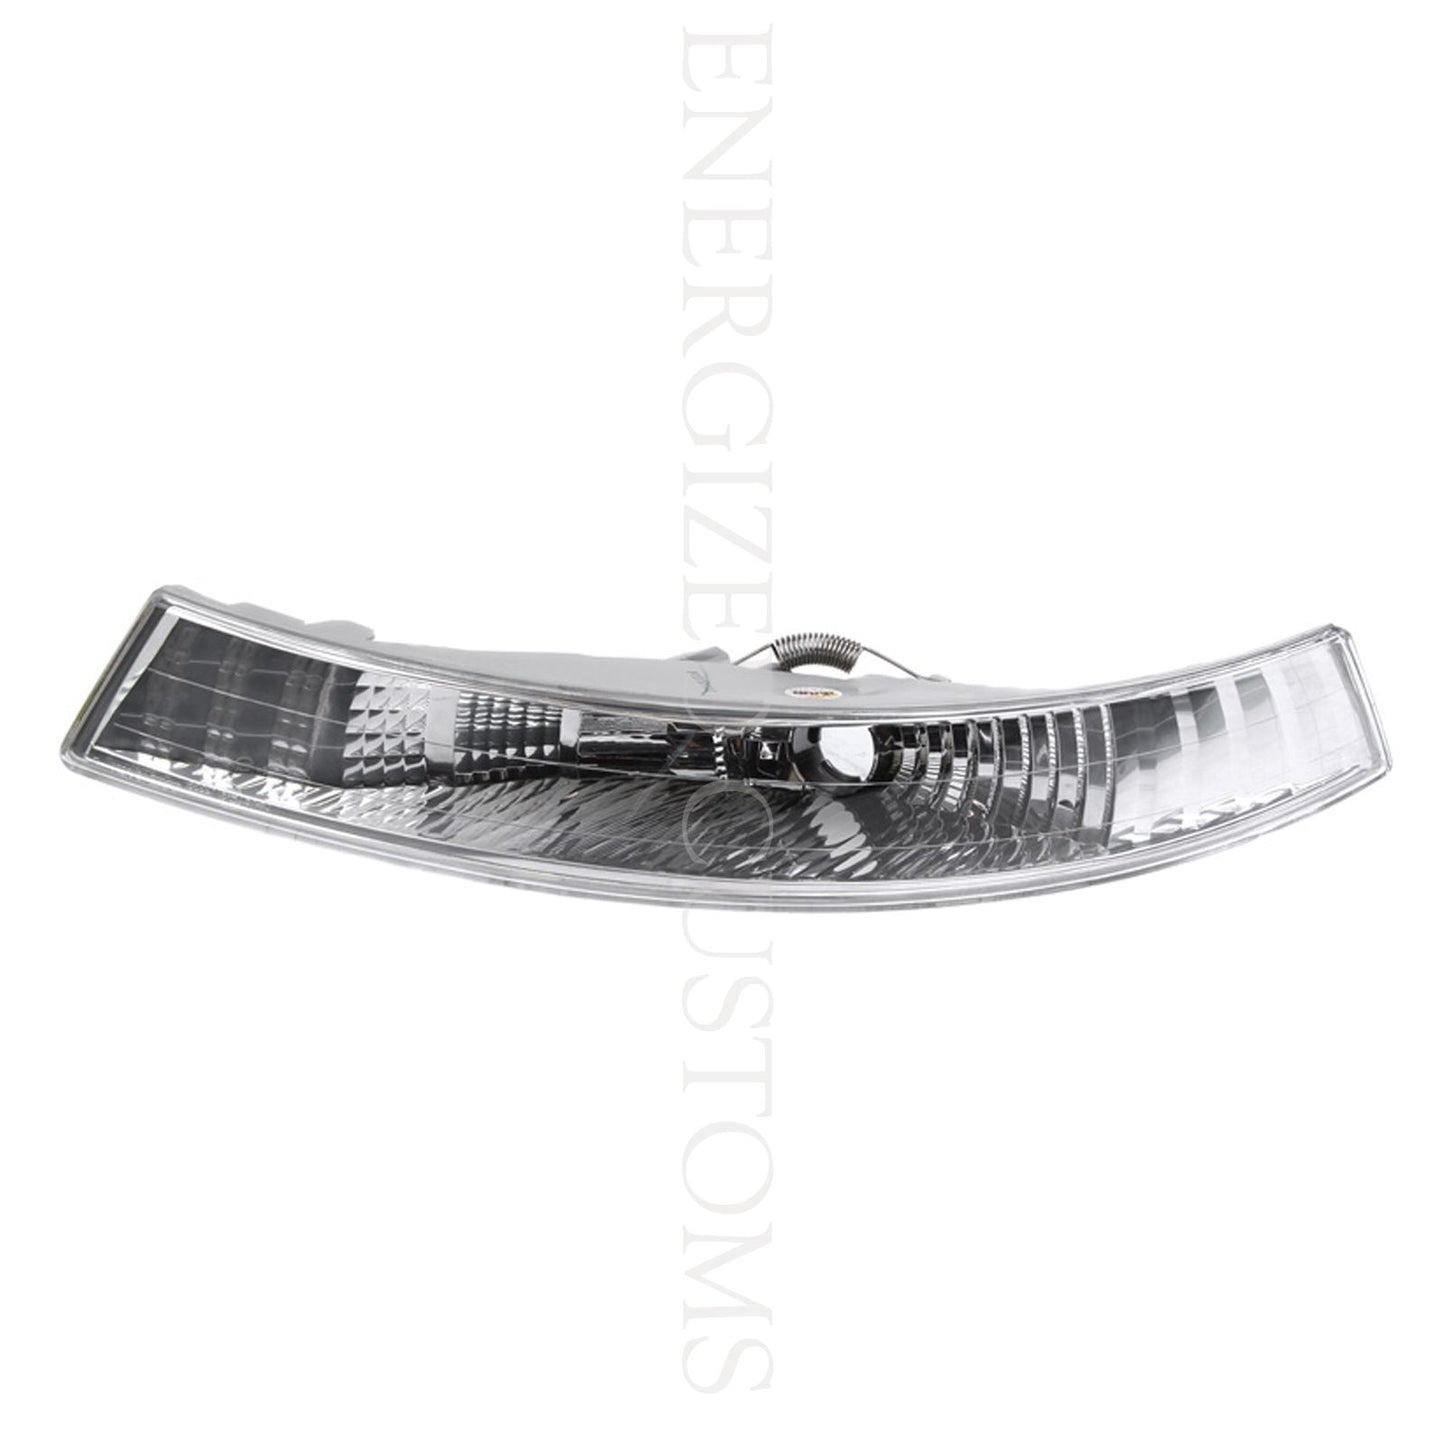 Renault Trafic 2001-2006 Front Indicator Clear Passenger Side N/S